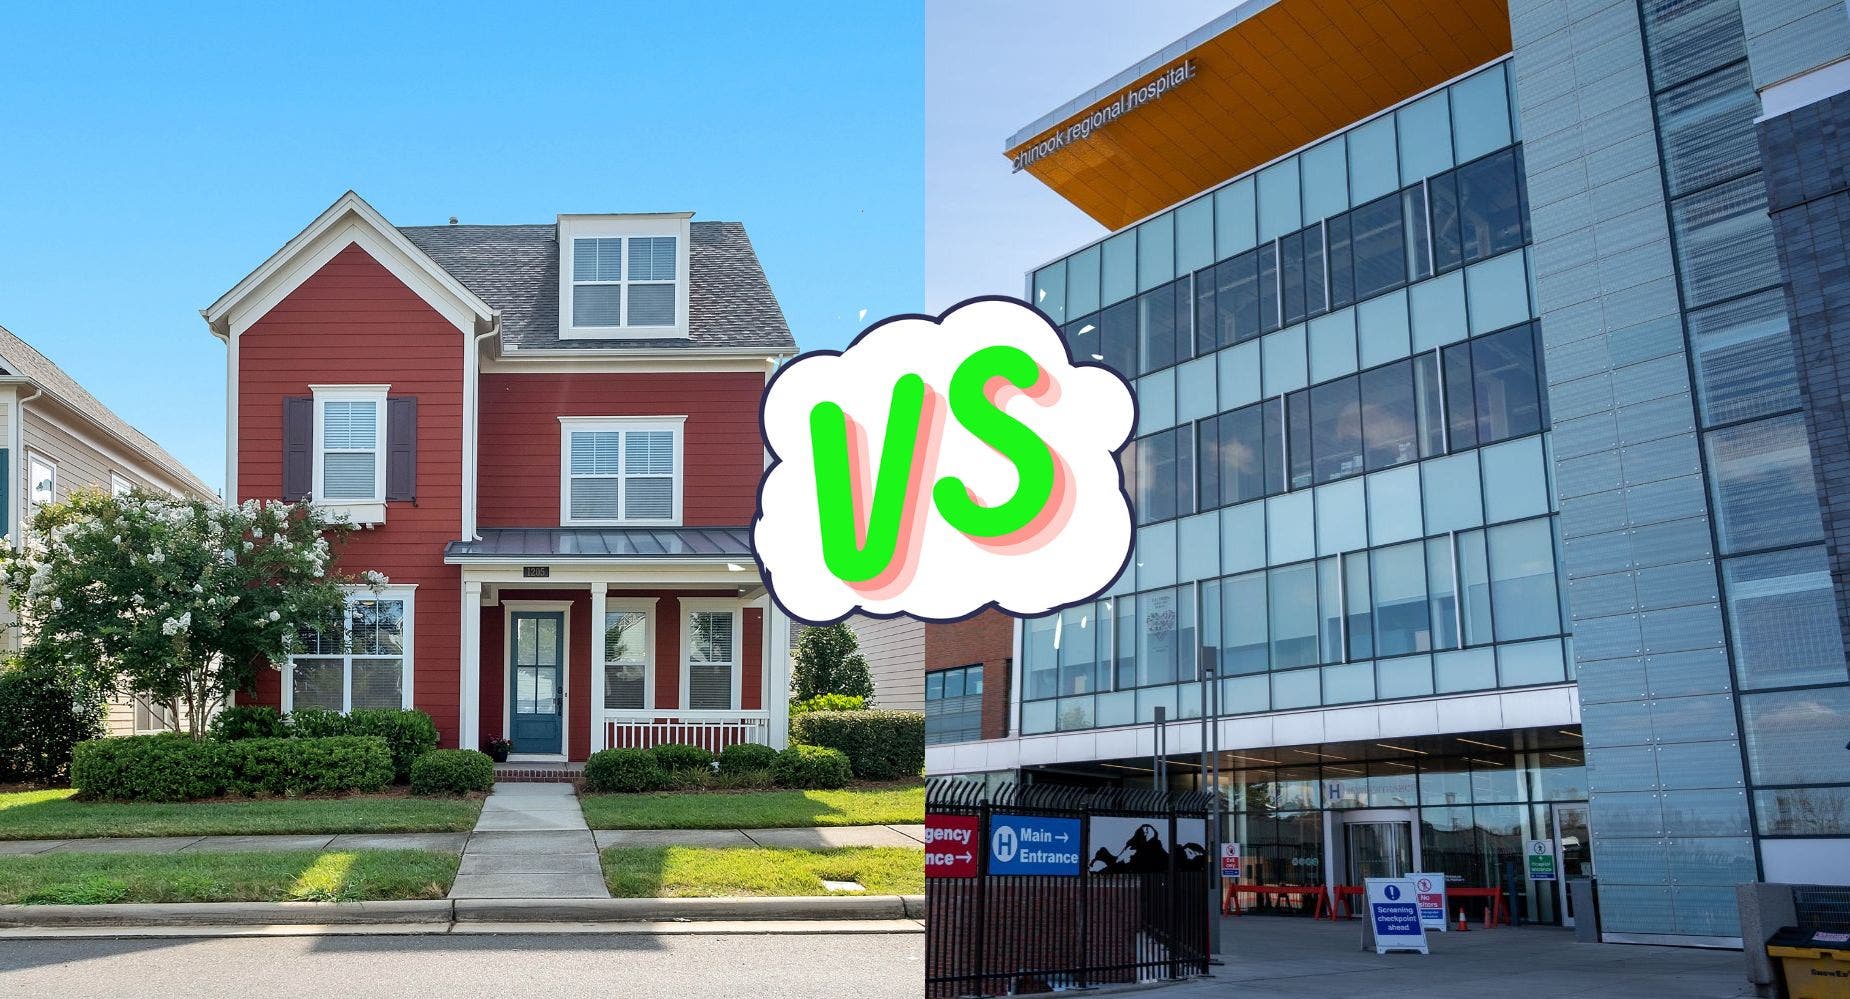 Residential Versus Healthcare REITs: Why Bank Of America Changed Its Ratings On These 5 REITs